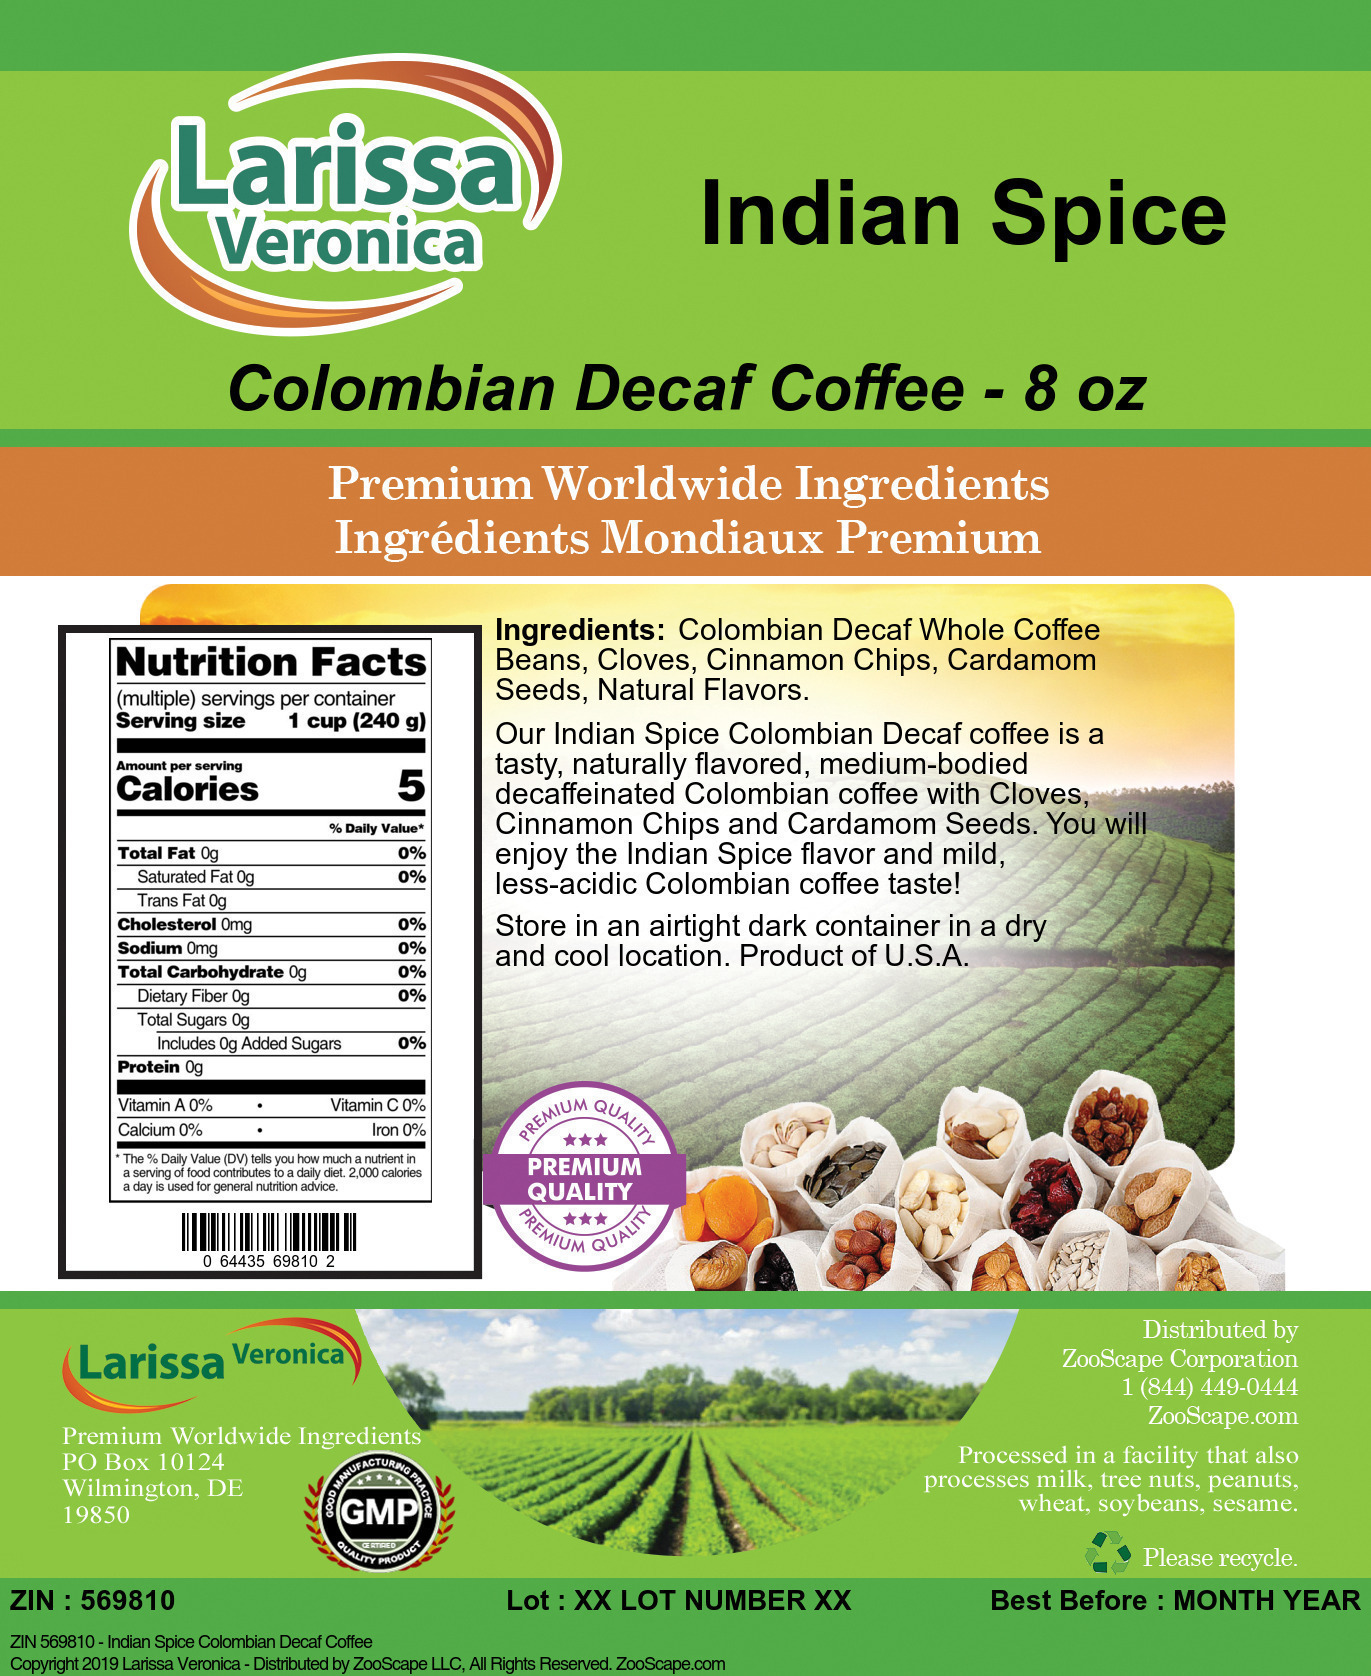 Indian Spice Colombian Decaf Coffee - Label